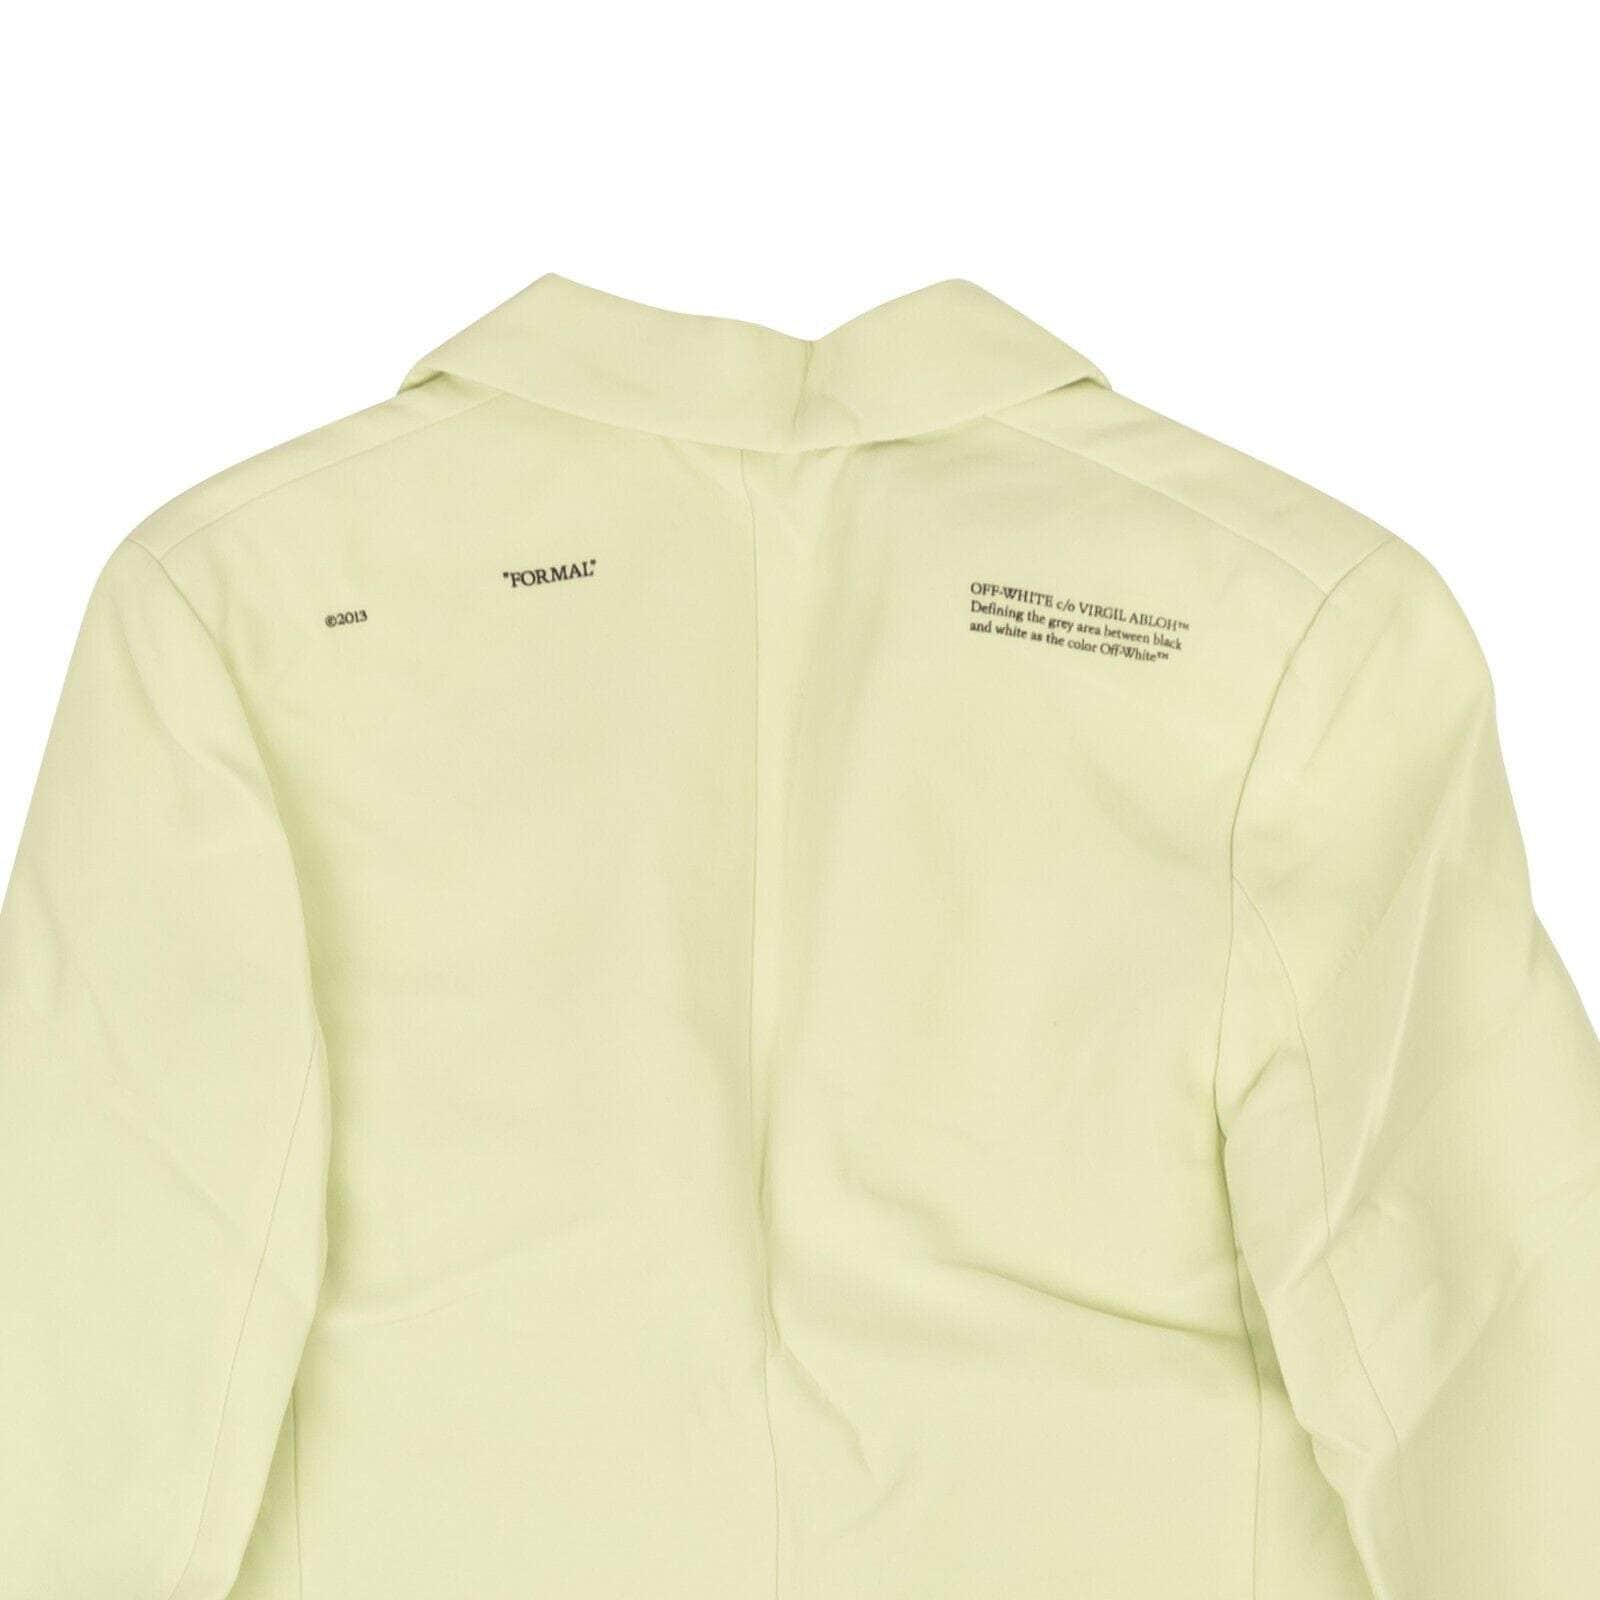 Off-White c/o Virgil Abloh 500-750, channelenable-all, chicmi, couponcollection, gender-womens, main-clothing, off-white-c-o-virgil-abloh, oww1, size-38, SPO, womens-jackets-blazers 38 Green Cady Fluid Tomboy Jacket OFW-XTPS-0031/38 OFW-XTPS-0031/38